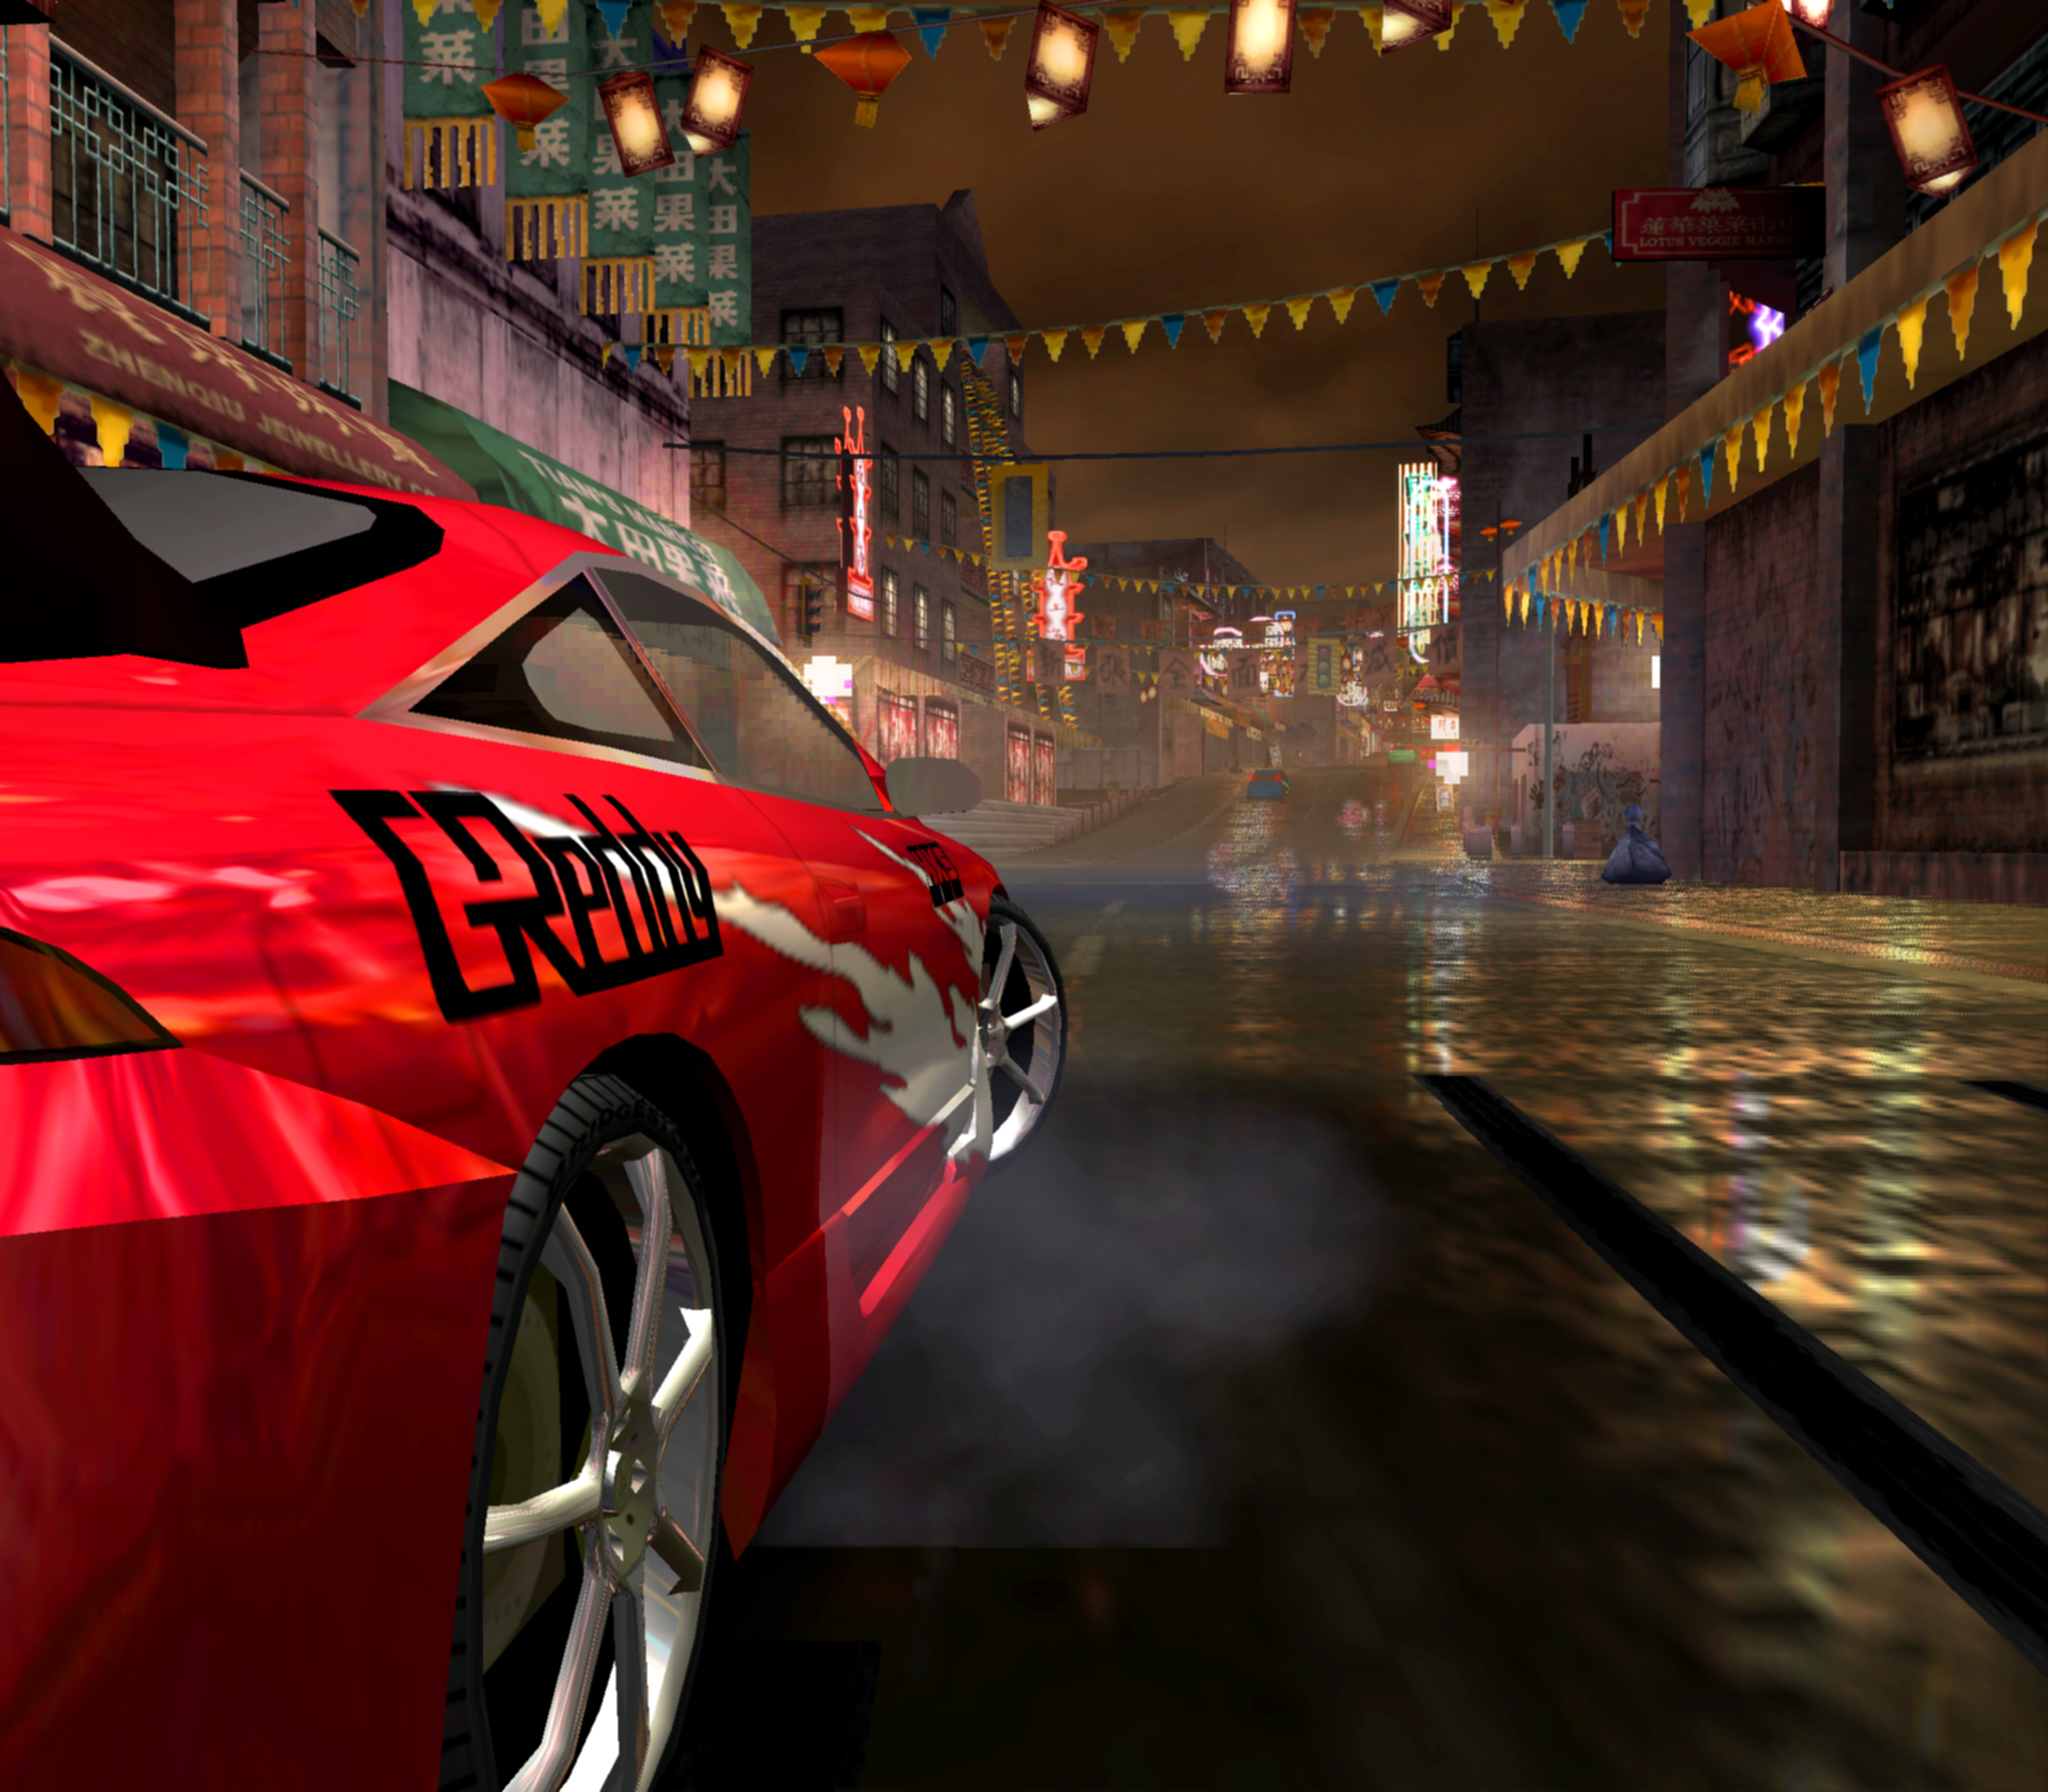 need for speed underground android